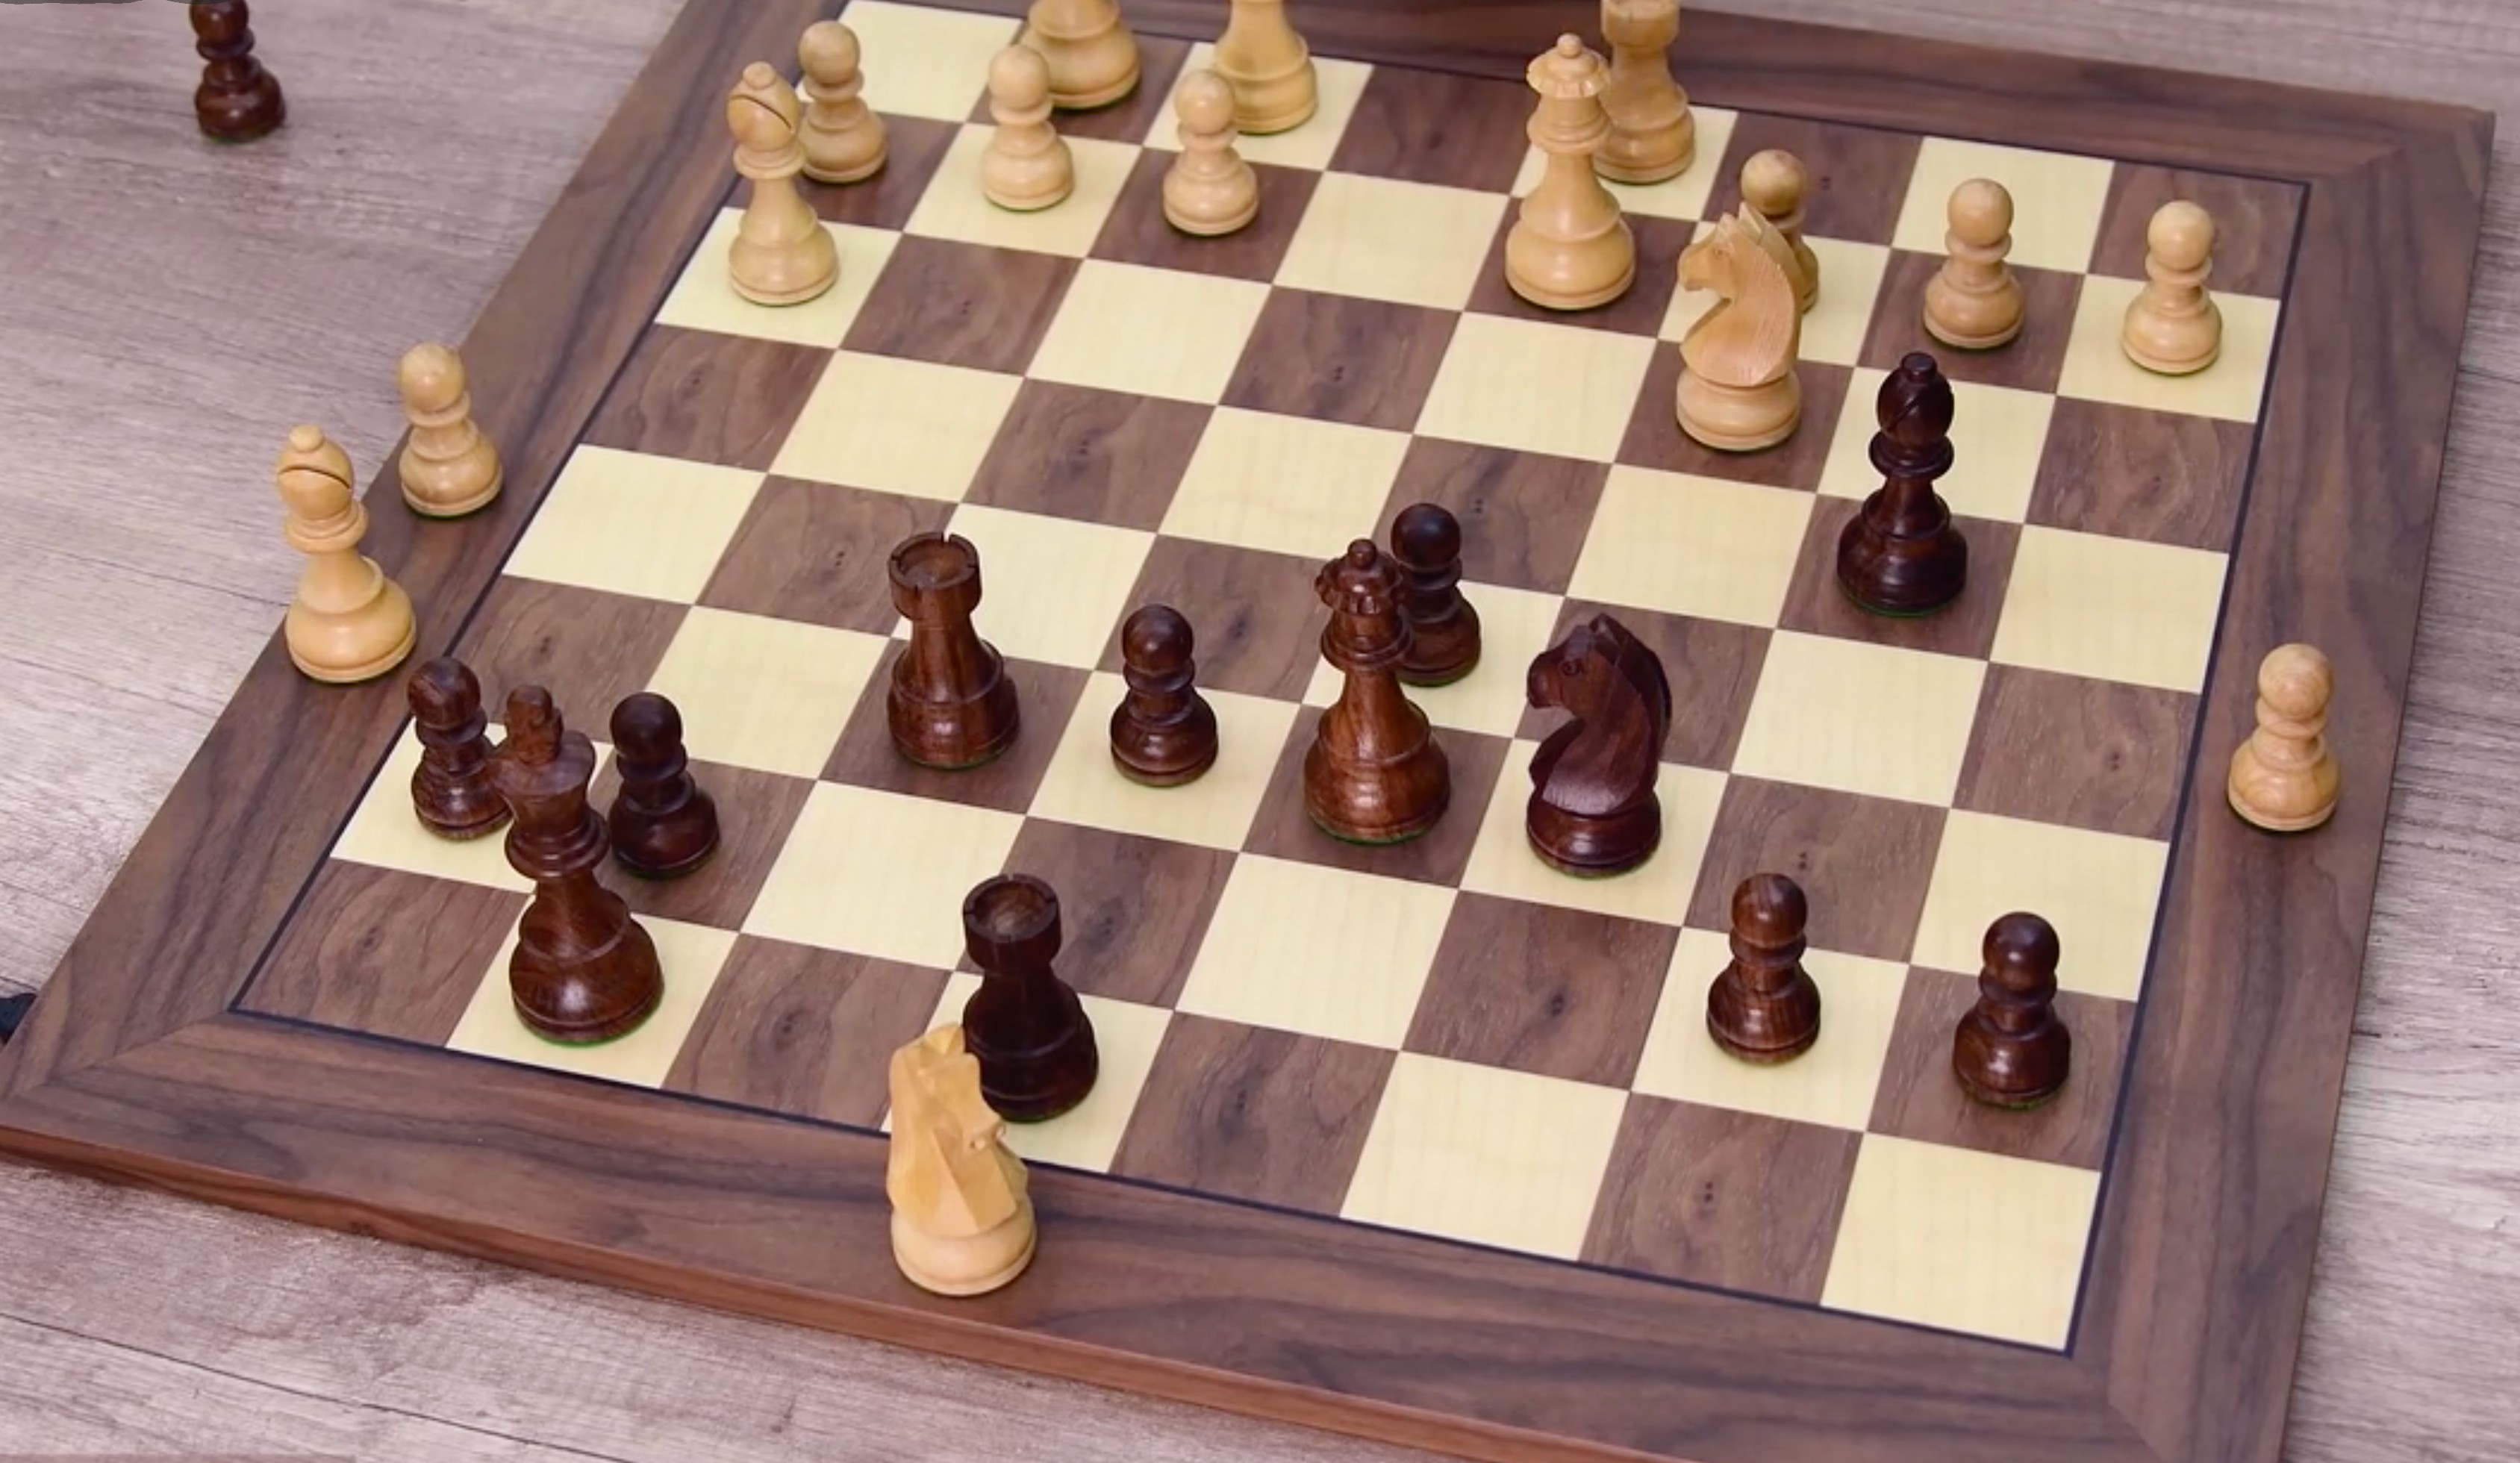 Sleuths called shenanigans on a robotic chess board. Kickstarter